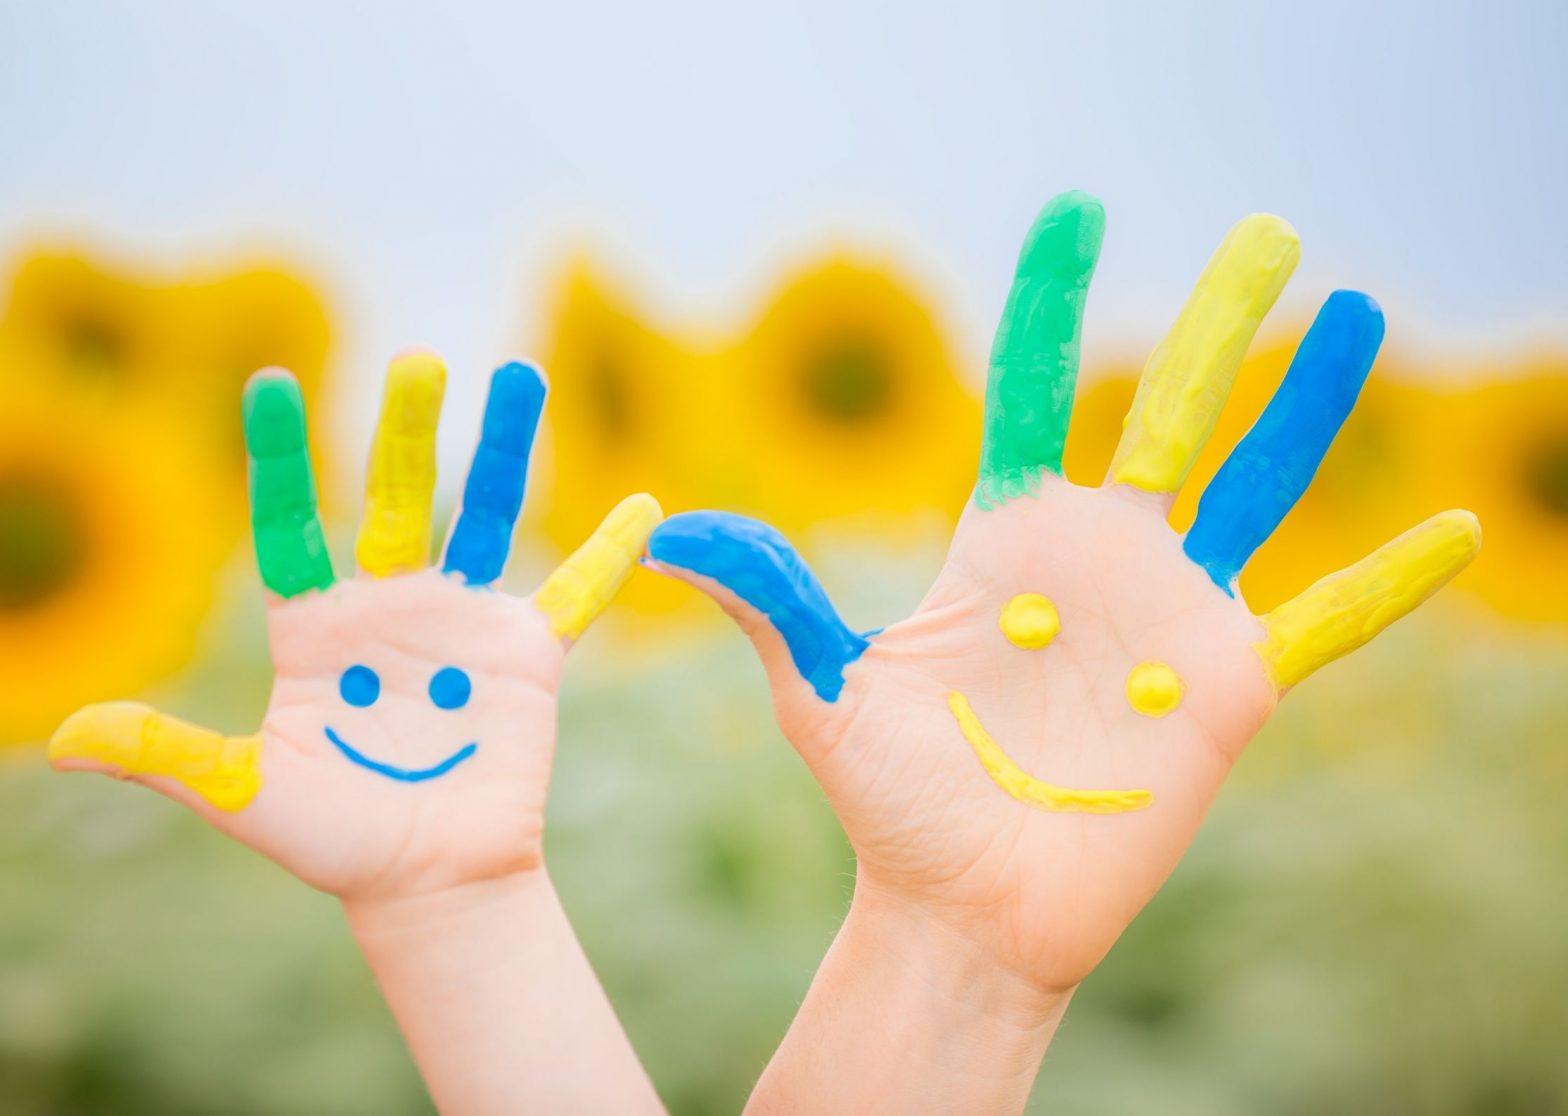 Two hands, one belonging to an adult and the other to a child, with painted fingers and a smiley face on the palm